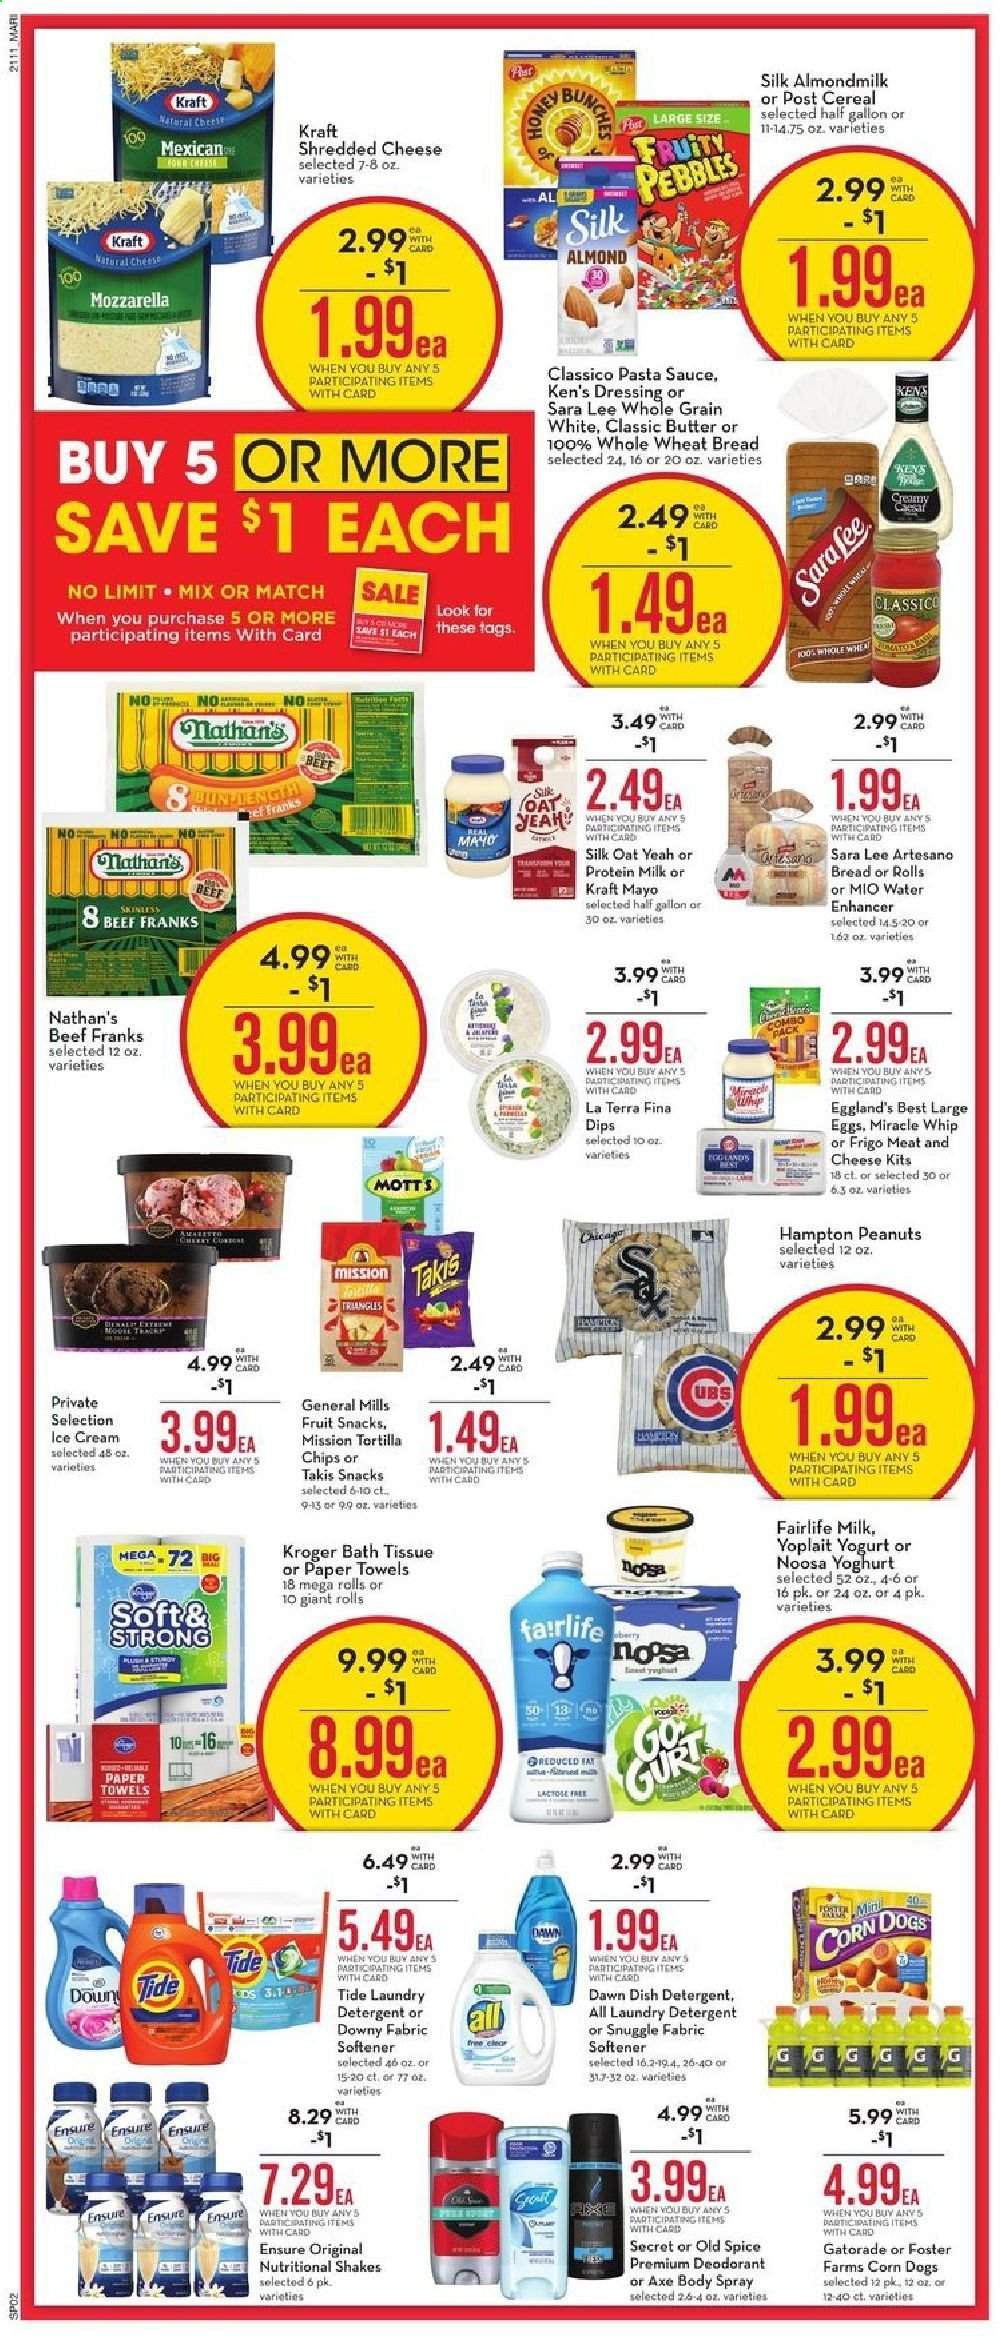 thumbnail - Mariano’s Flyer - 04/14/2021 - 04/20/2021 - Sales products - wheat bread, Sara Lee, corn, pasta sauce, Kraft®, mozzarella, shredded cheese, yoghurt, Yoplait, almond milk, milk, Silk, shake, large eggs, butter, mayonnaise, Miracle Whip, ice cream, fruit snack, tortilla chips, chips, cereals, Fruity Pebbles, spice, dressing, peanuts, Mott's, Gatorade, detergent, Snuggle, Tide, fabric softener, laundry detergent, Downy Laundry. Page 3.